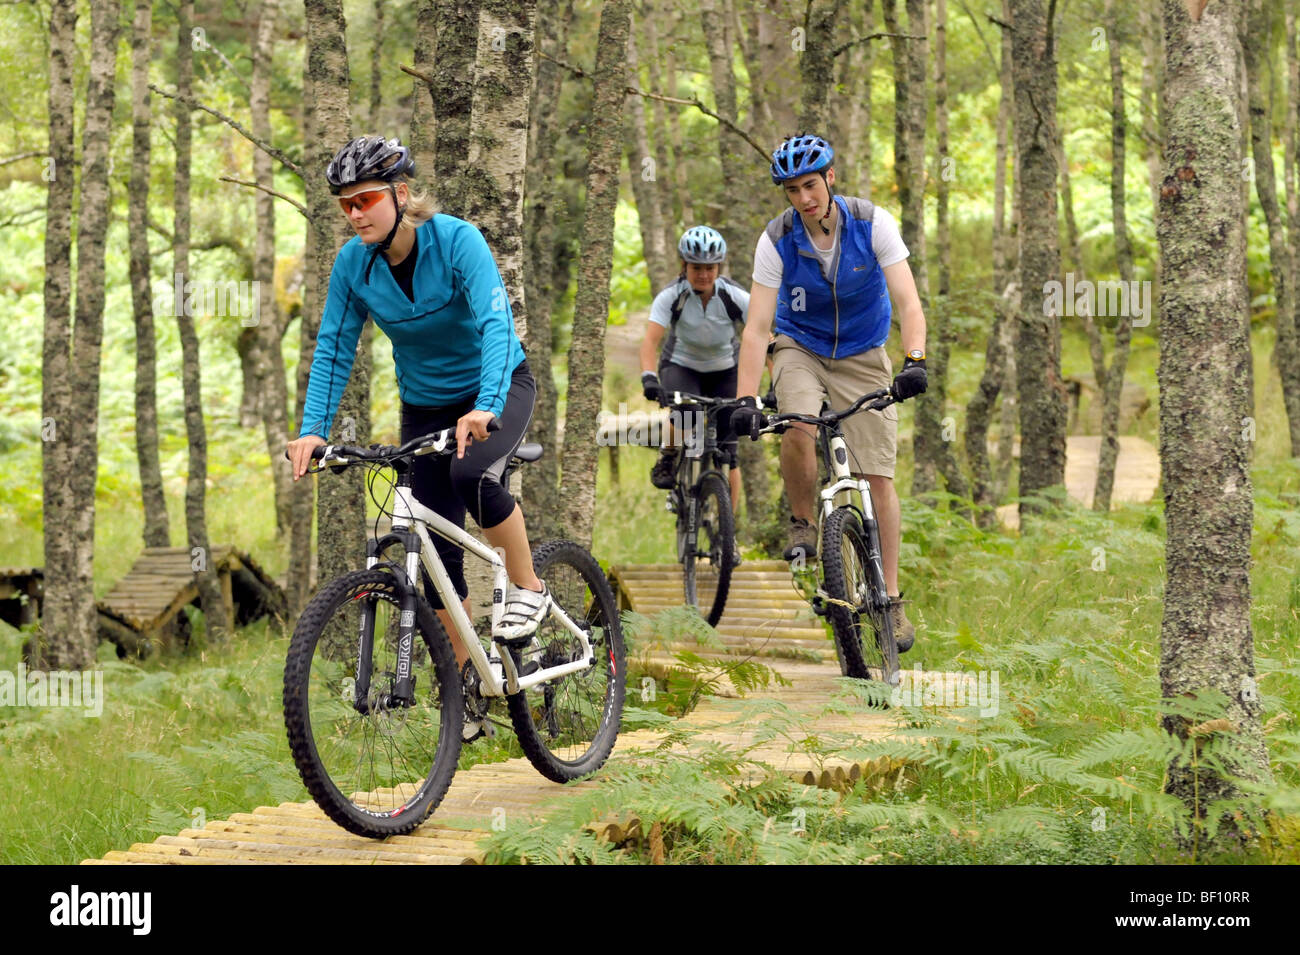 Friends cycling on a purpose built cross country mountain bike course Stock Photo